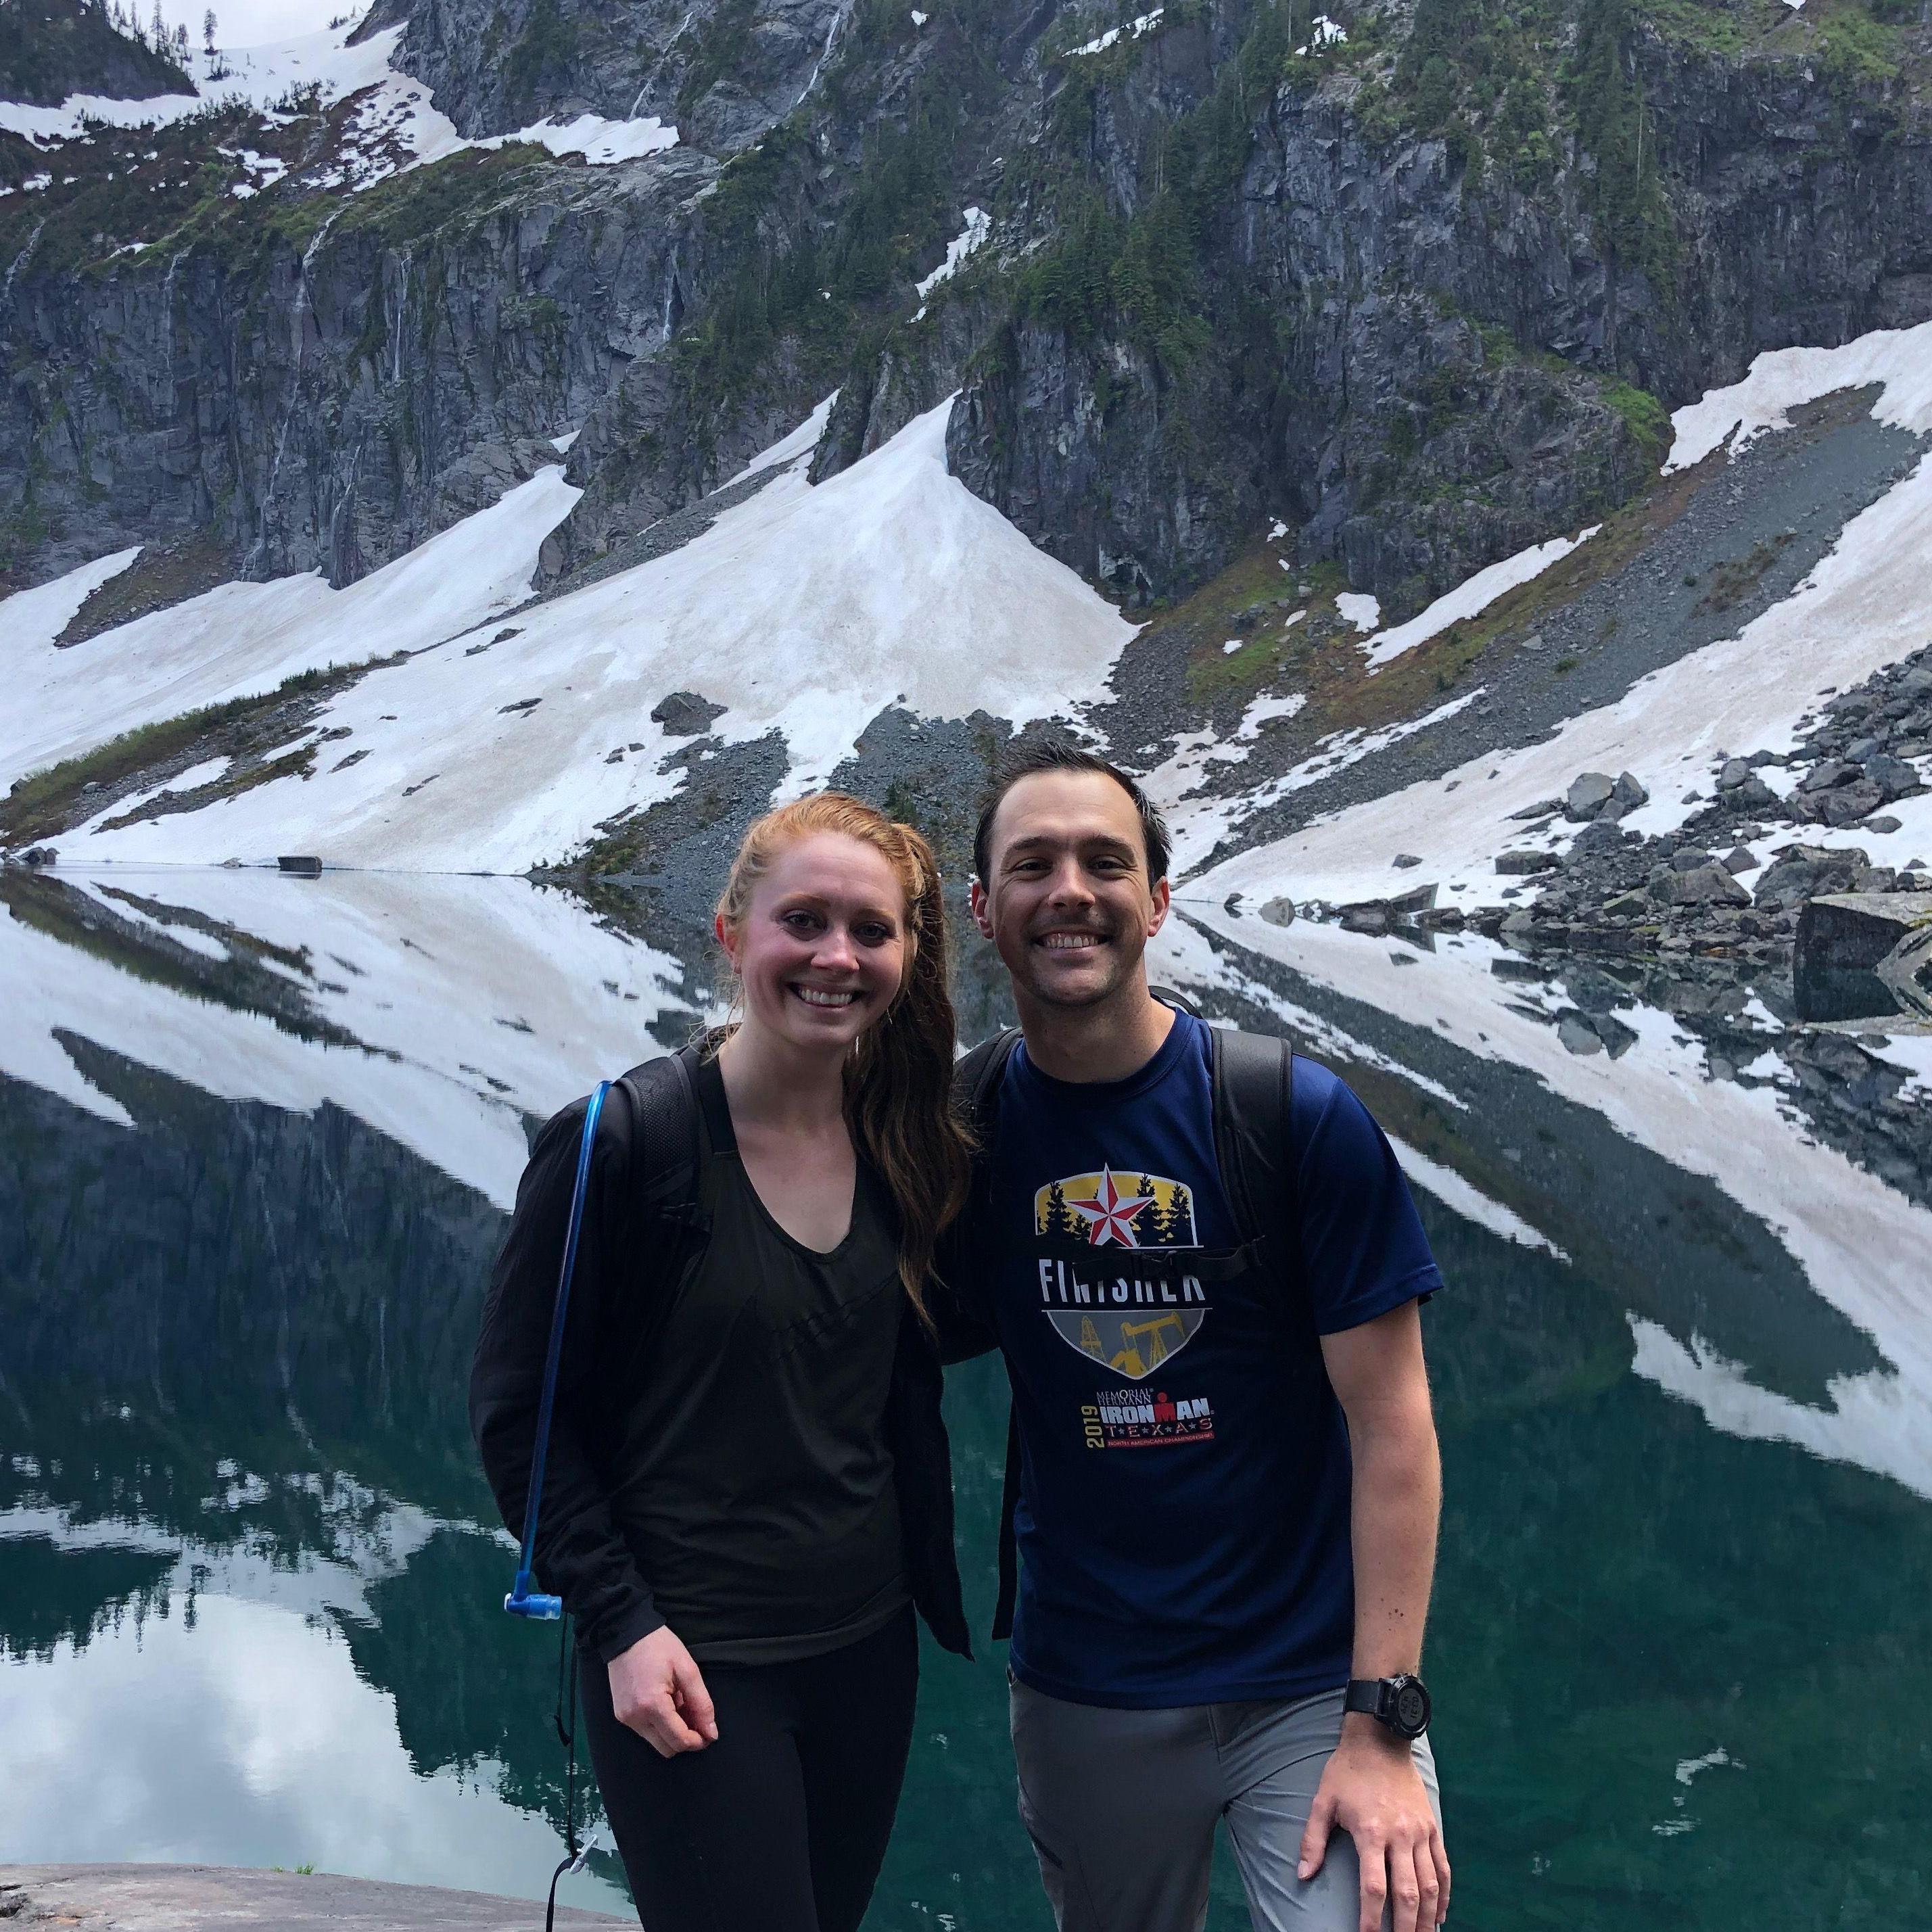 Second Date to Lake Serene